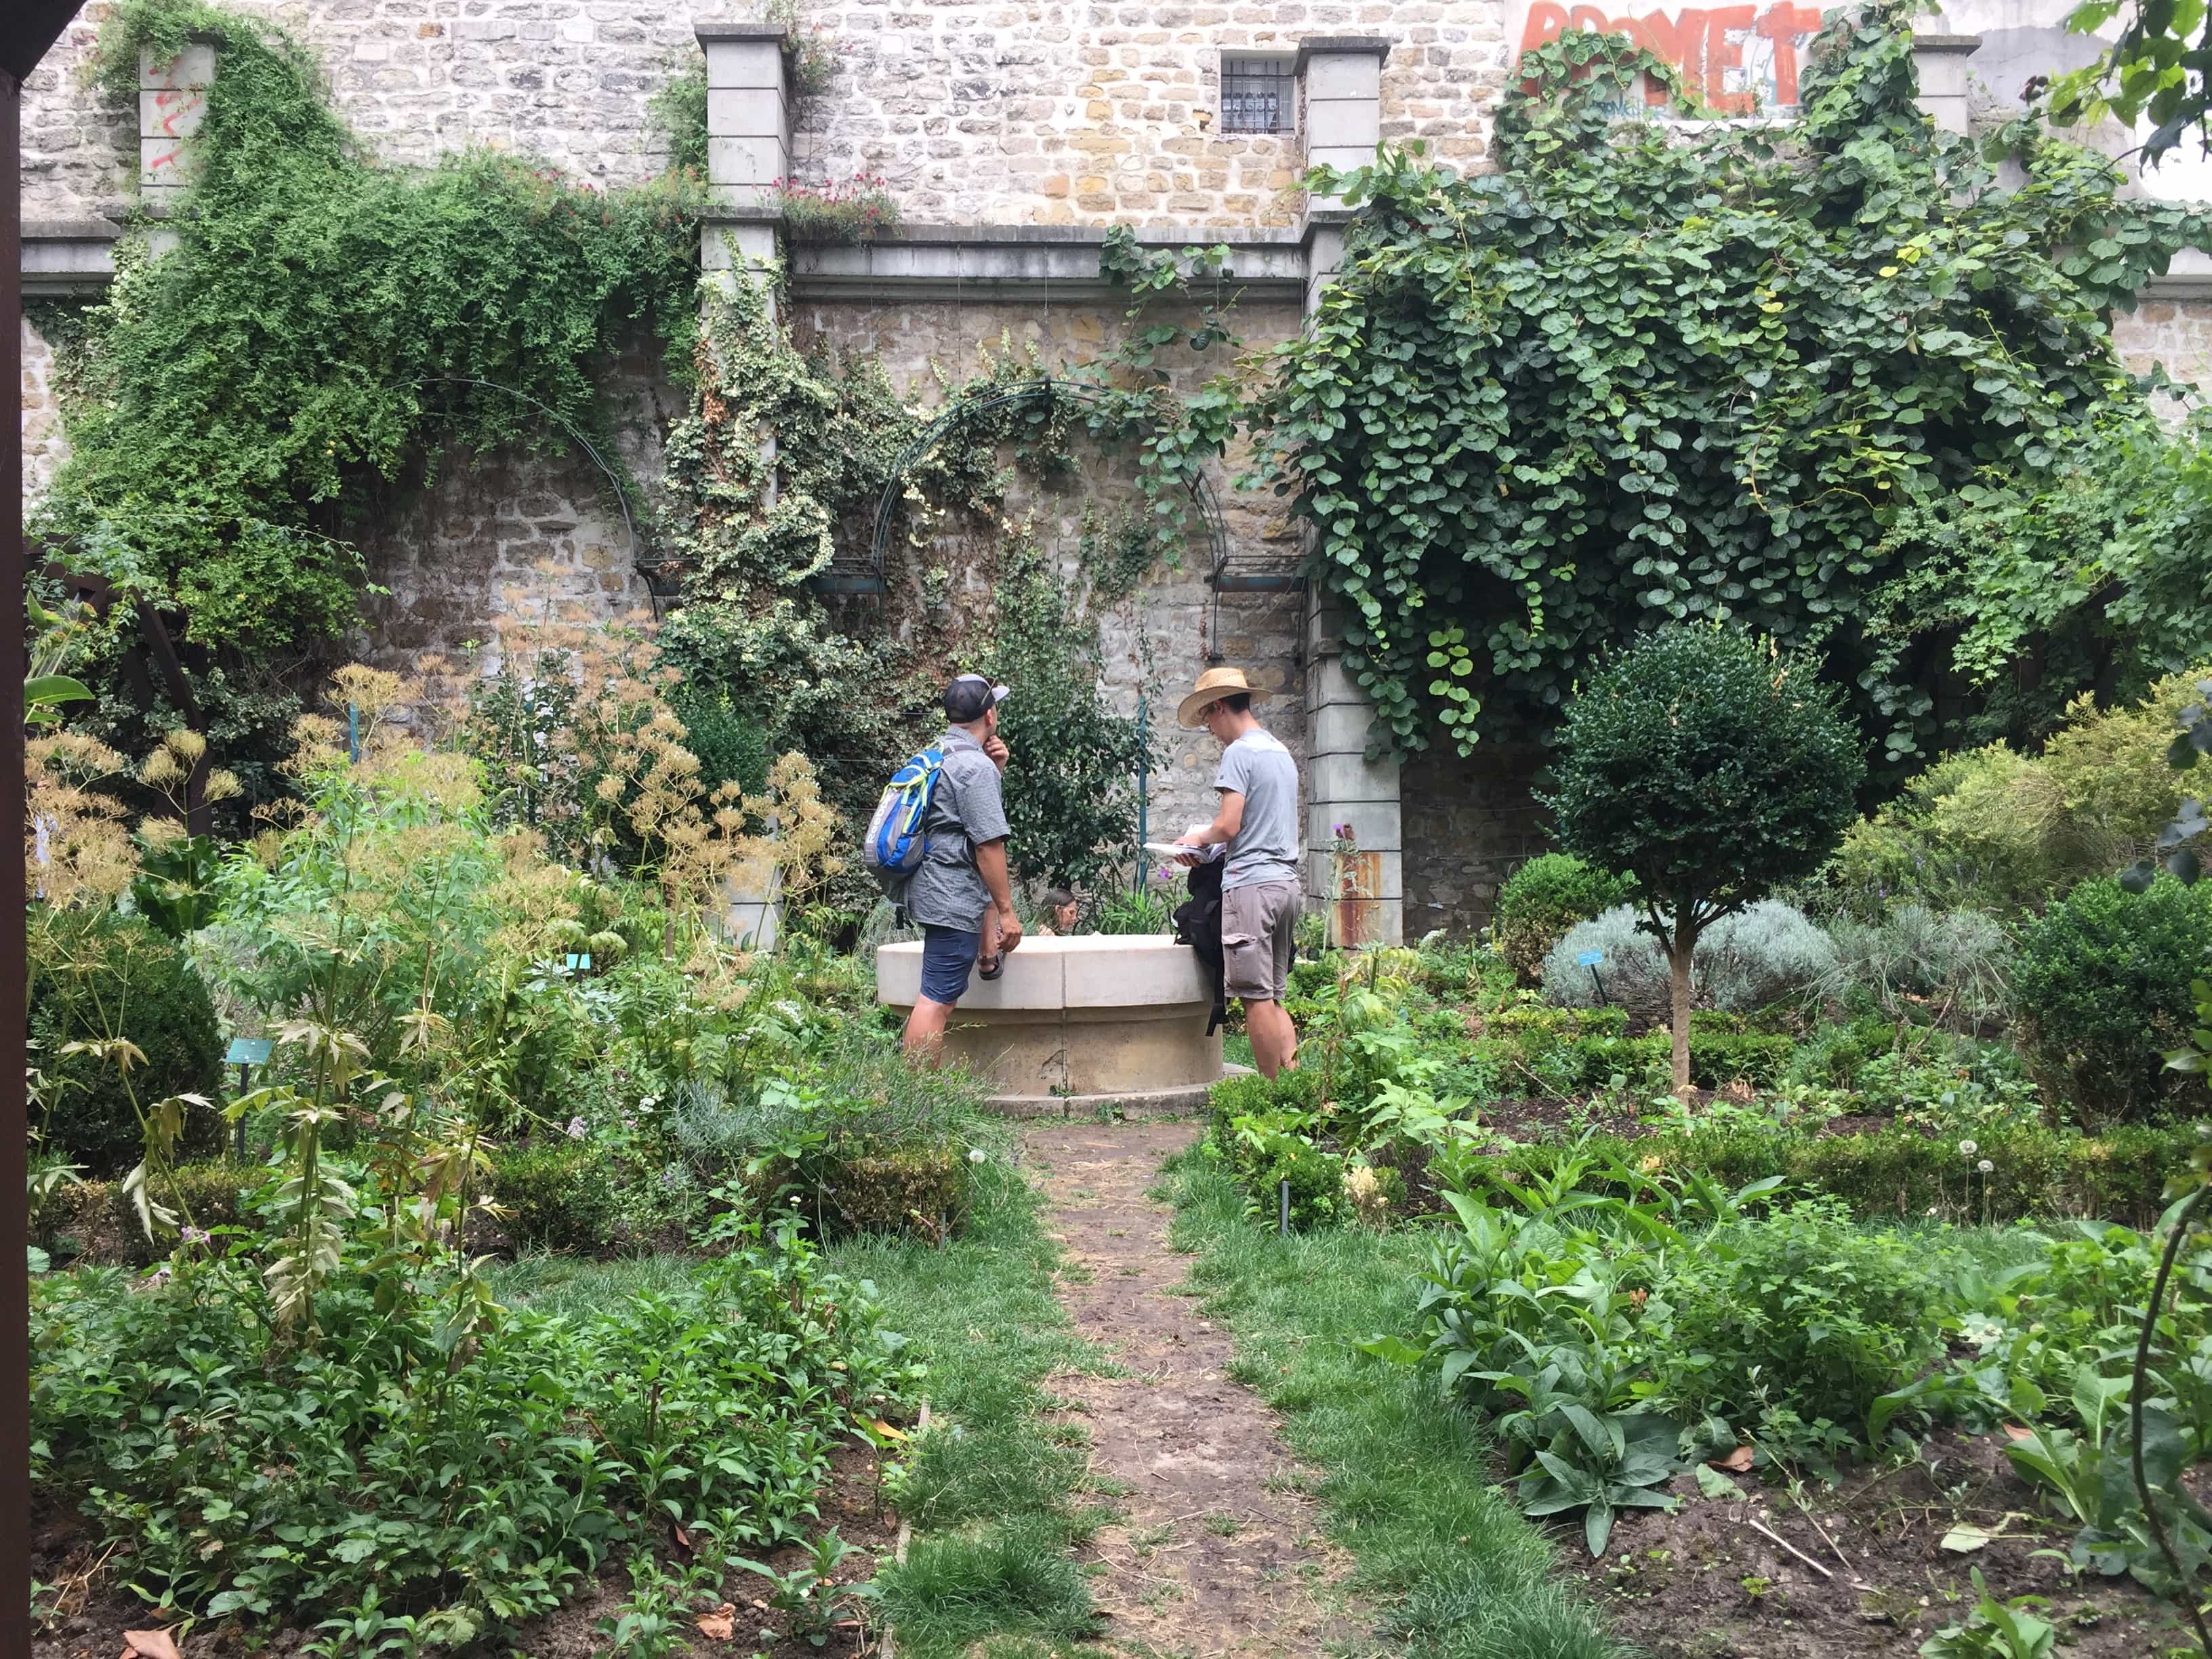 Garden in the middle of no where/Paris